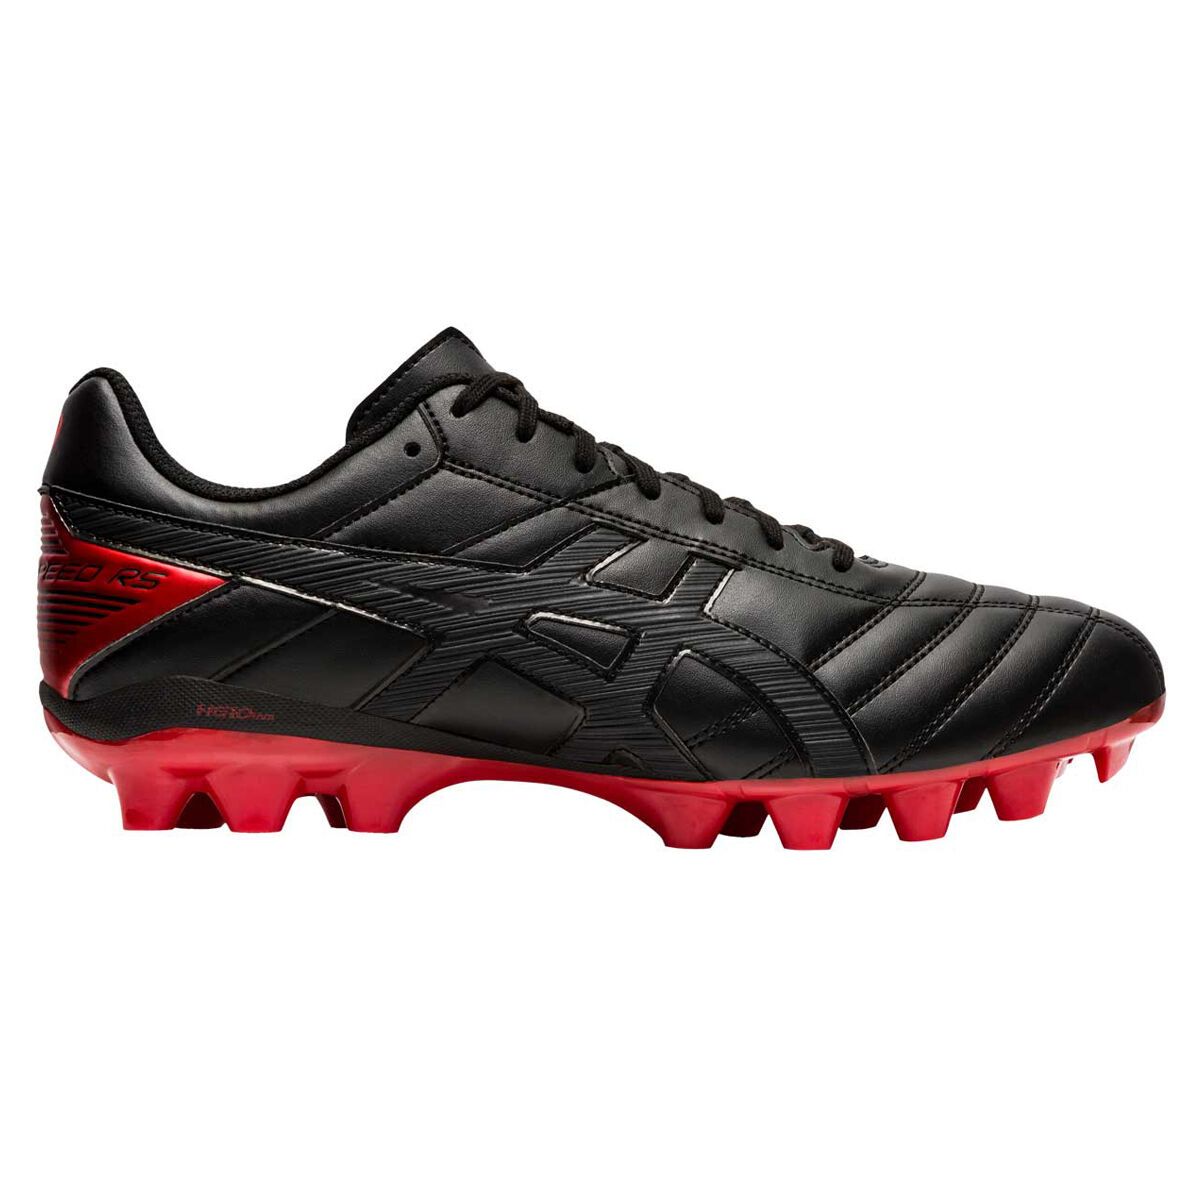 red asics football boots